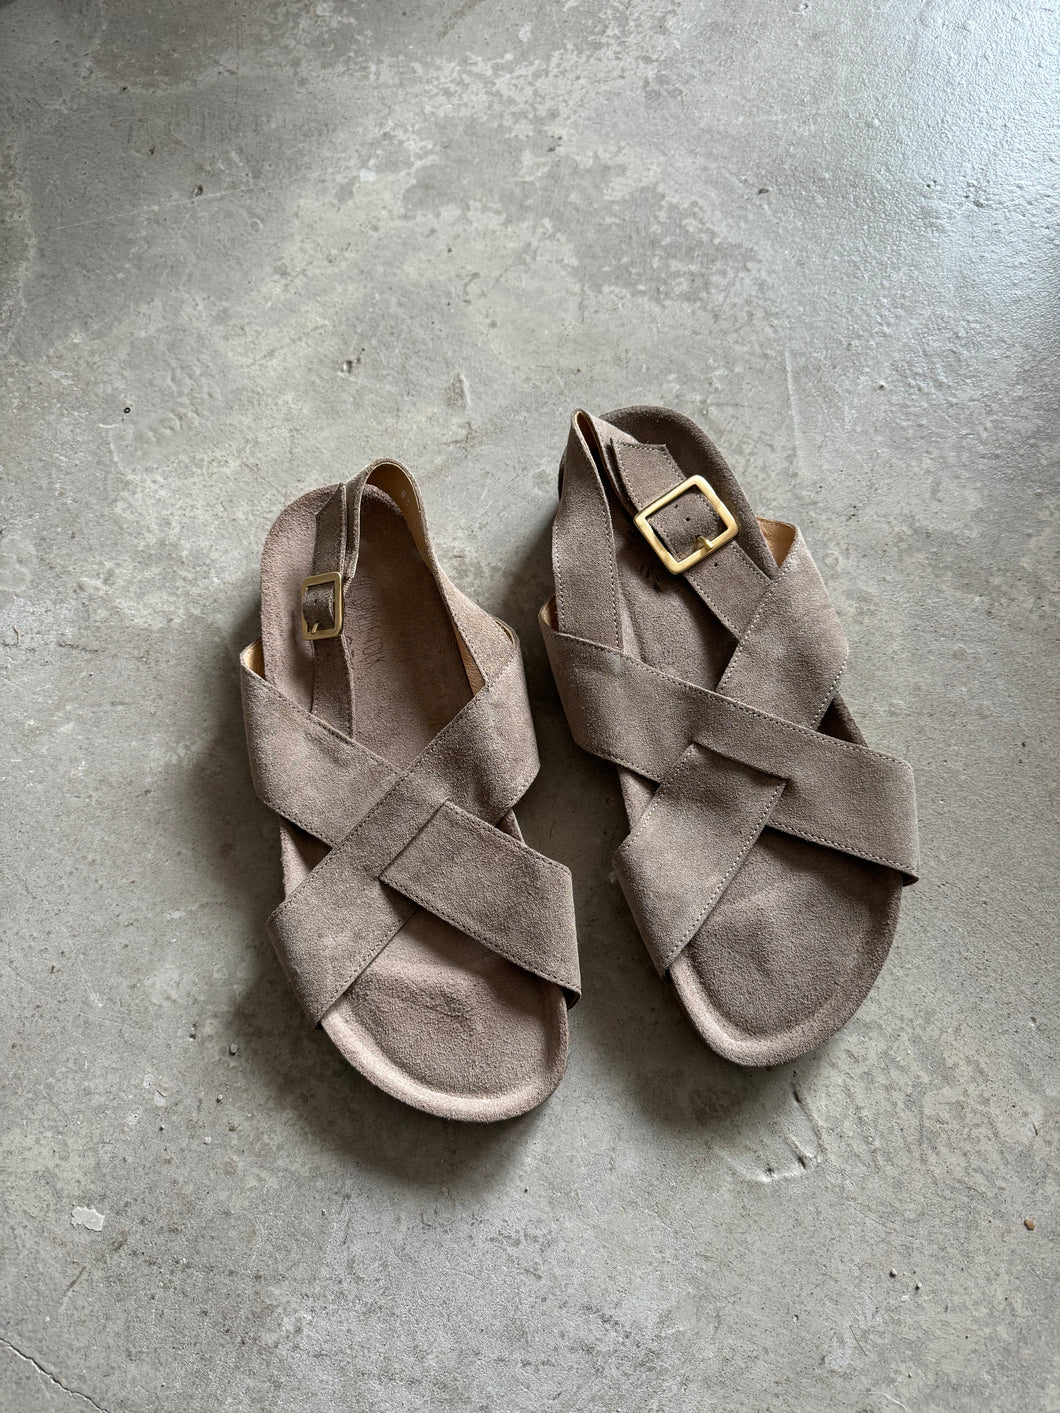 The Simple Folk Suede Sandals - UK 7